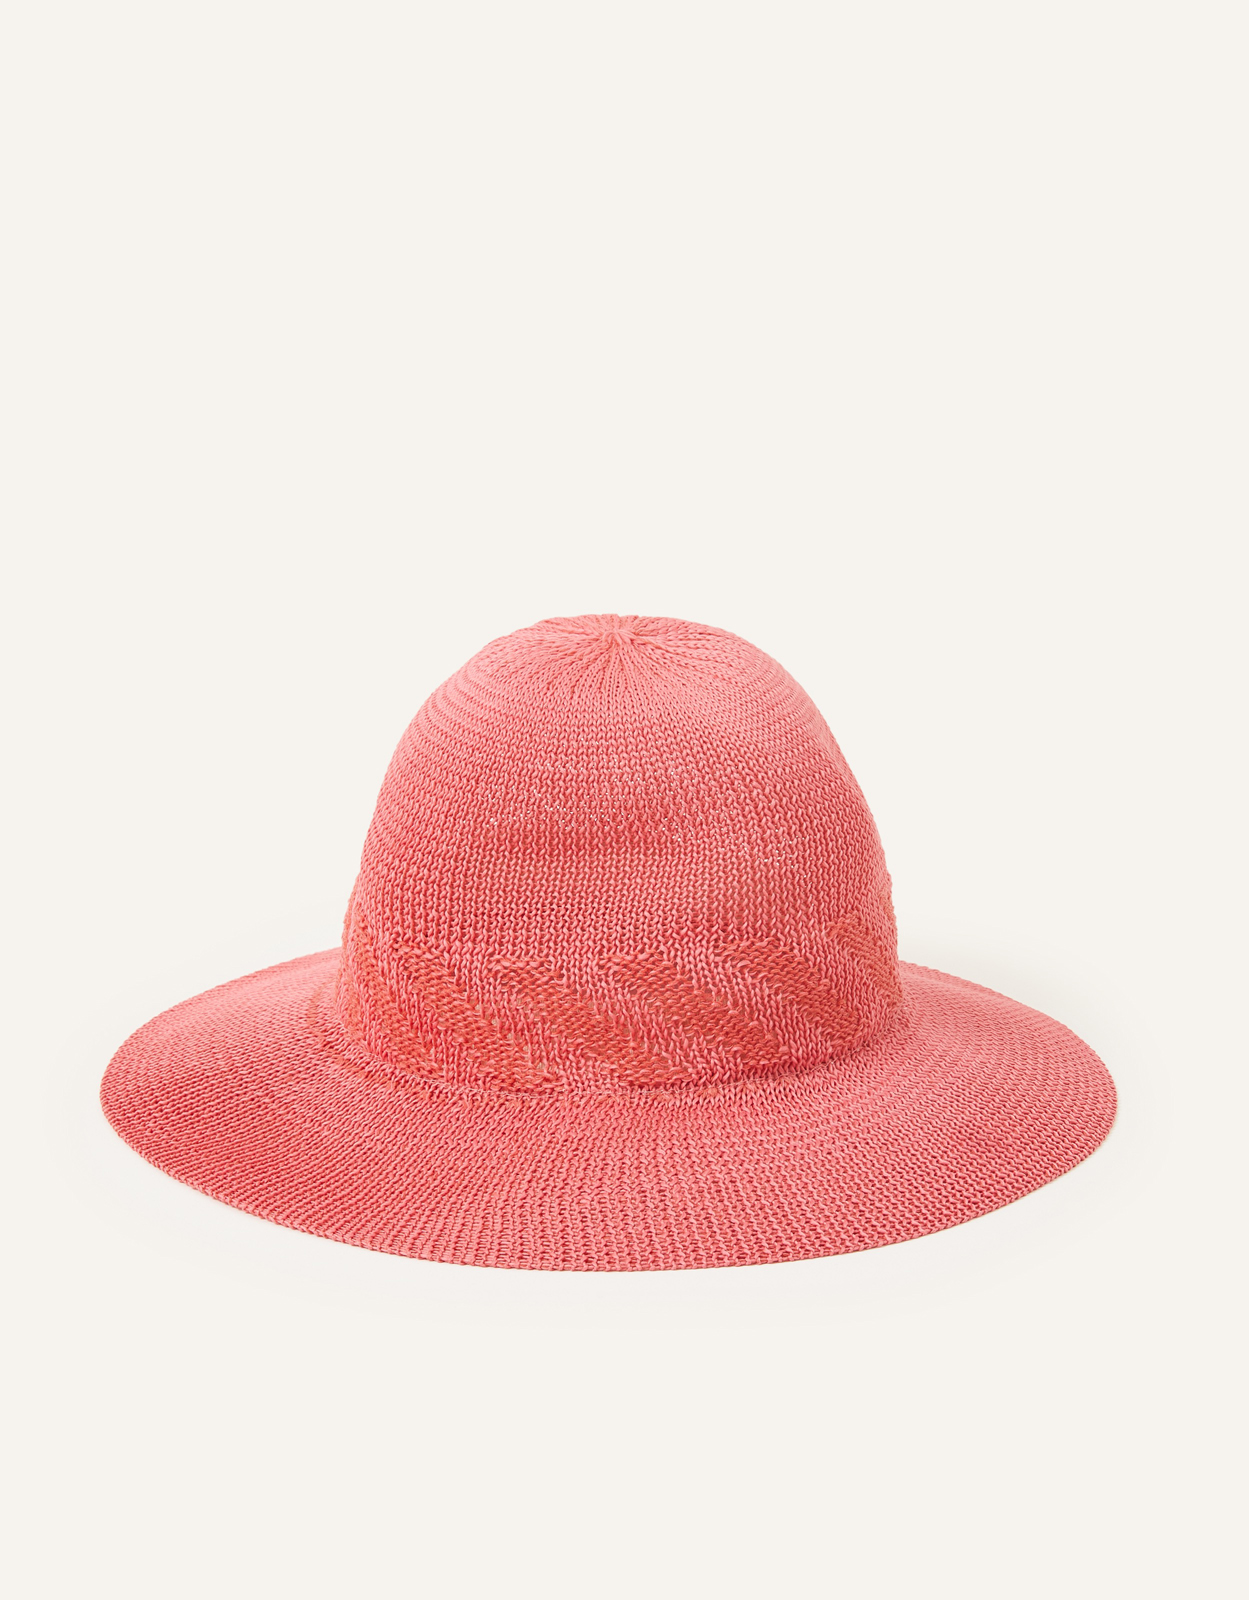 Accessorize Women's Pink Packable Fedora, Size: One Size